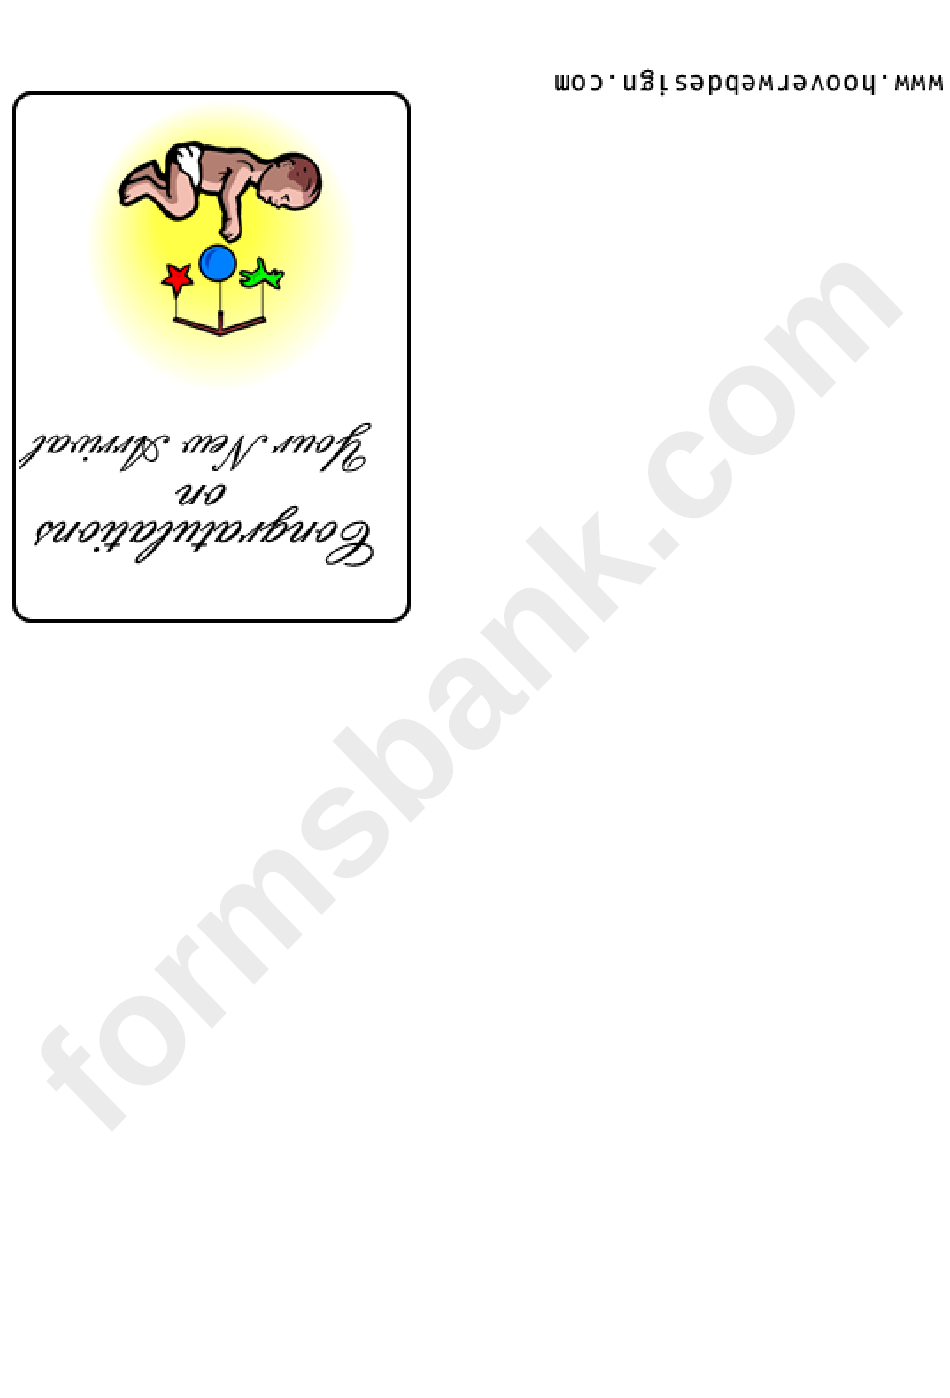 Congratulations On Your New Arrival Greeting Card Template